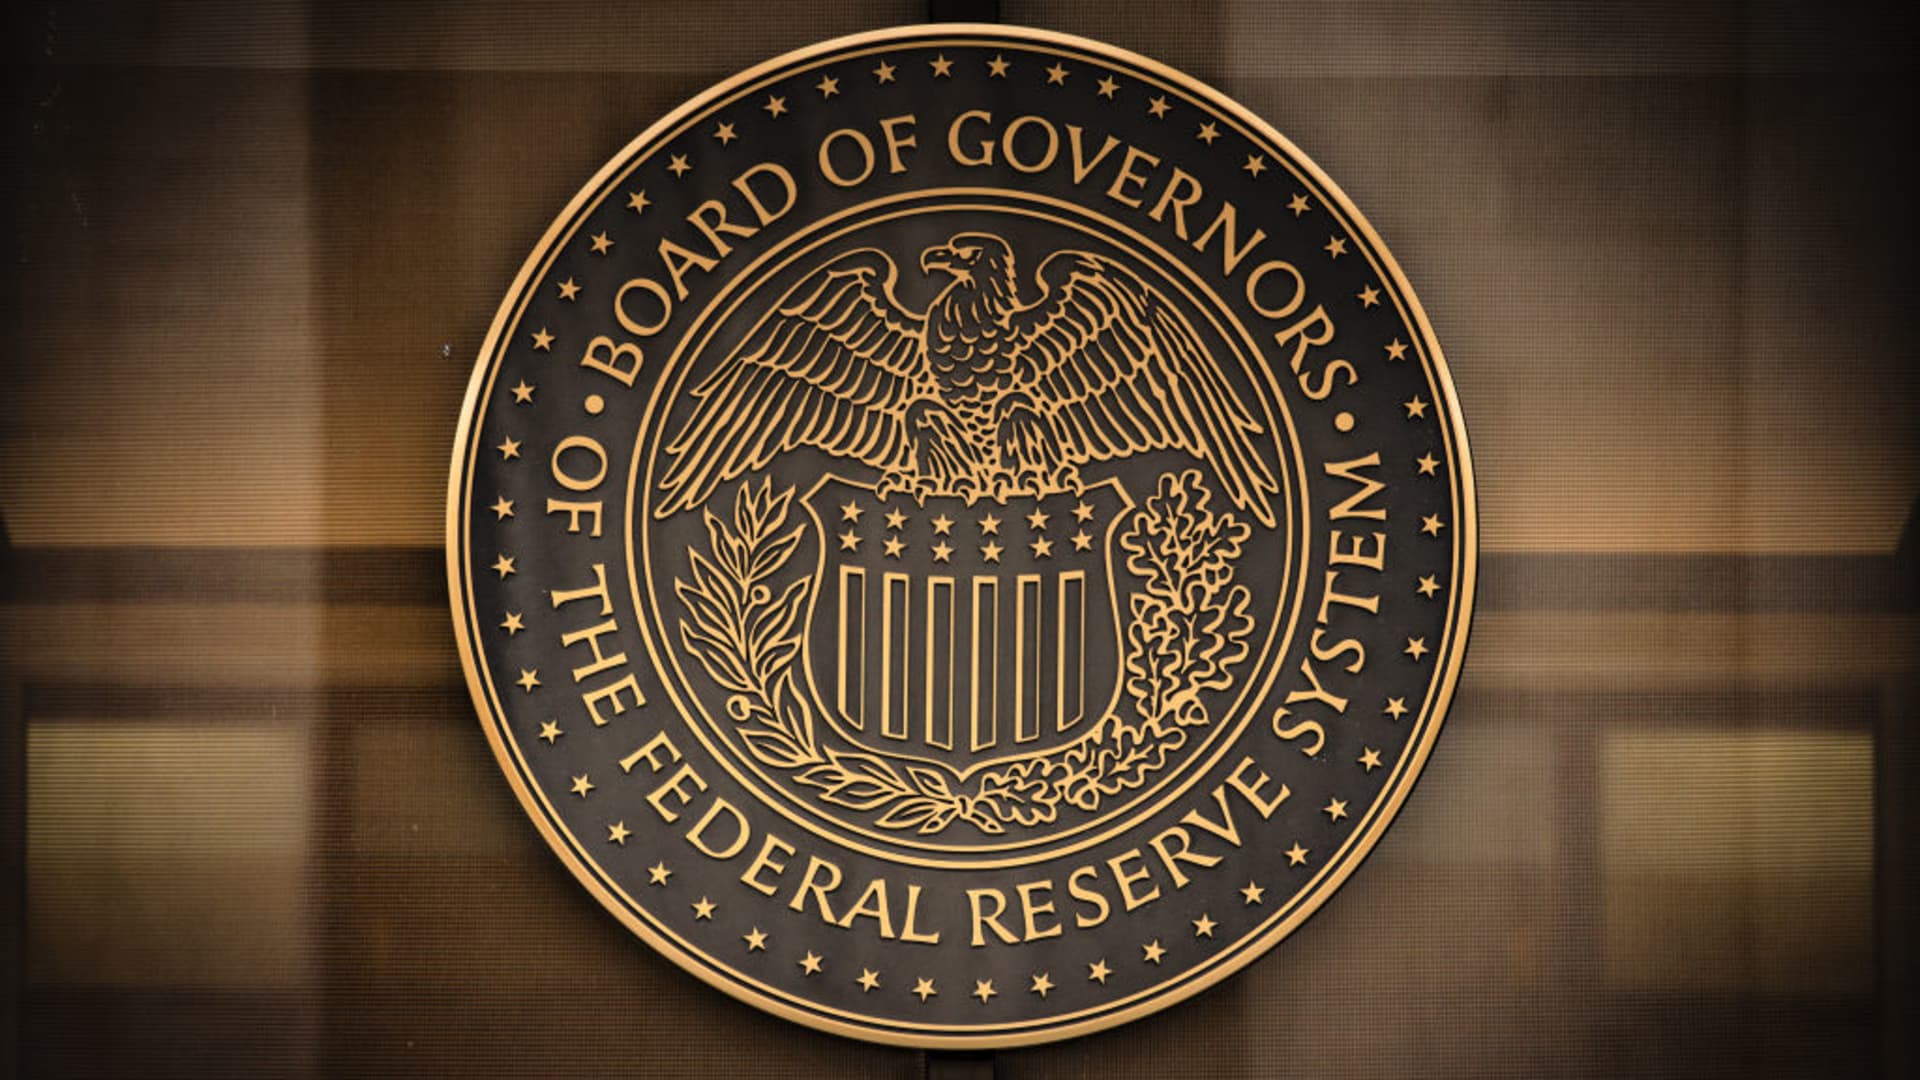 The seal of the U.S. Federal Reserve Board of Governors across the street from the Marriner S. Eccles Federal Reserve building in Washington, D.C., U.S., on Sunday, Dec. 19, 2021.